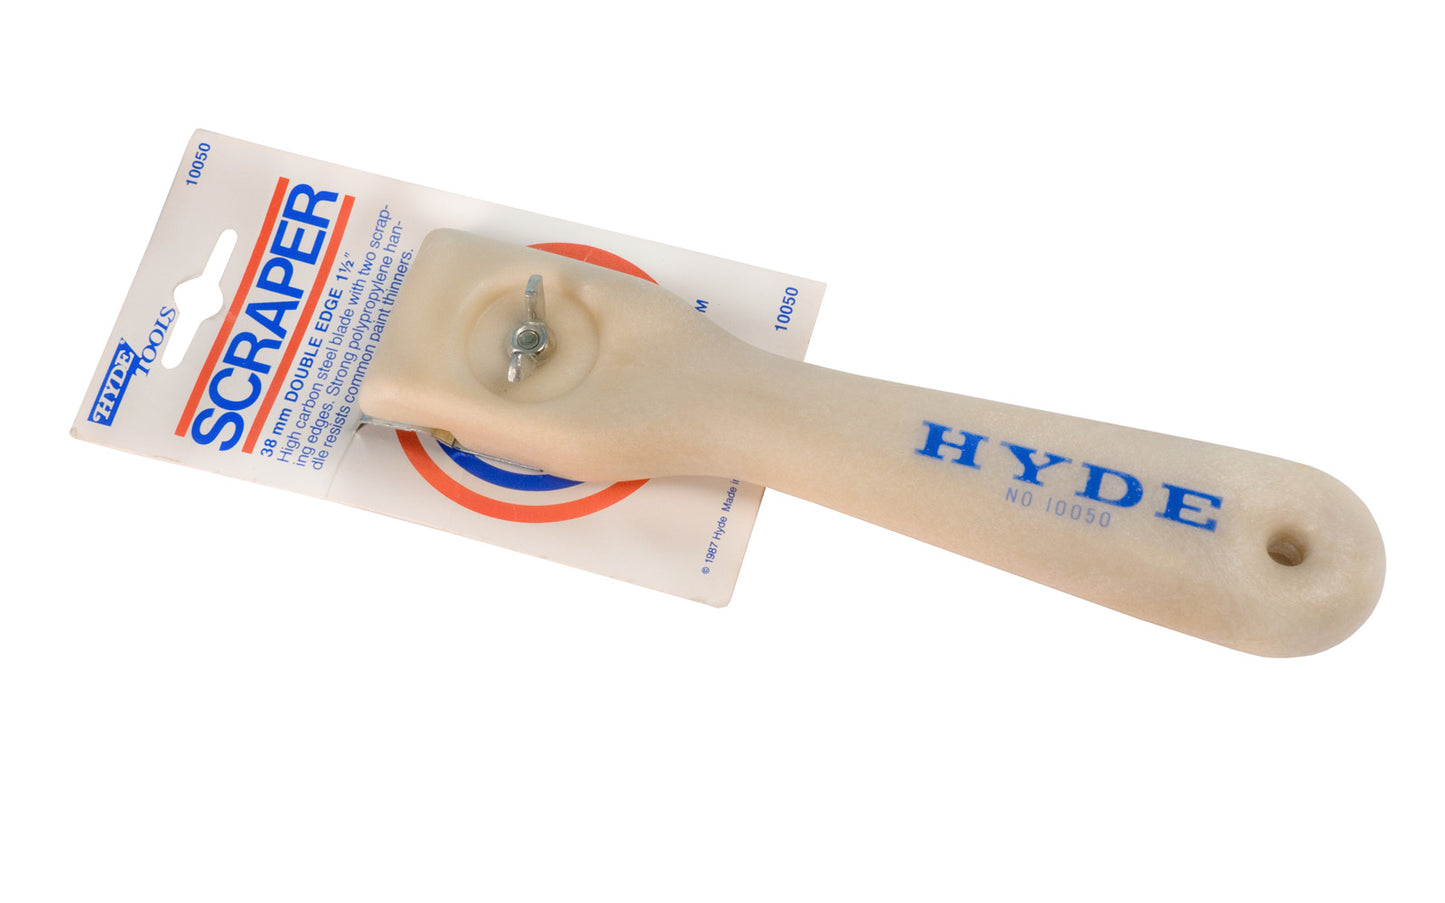 Hyde Tools 1-1/2" Double Edge Scraper - 10050. Strong polypropylene handle resists common paint thinners. High Carbon Steel Blade.  Made in USA. 38 mm blade. 079423100505